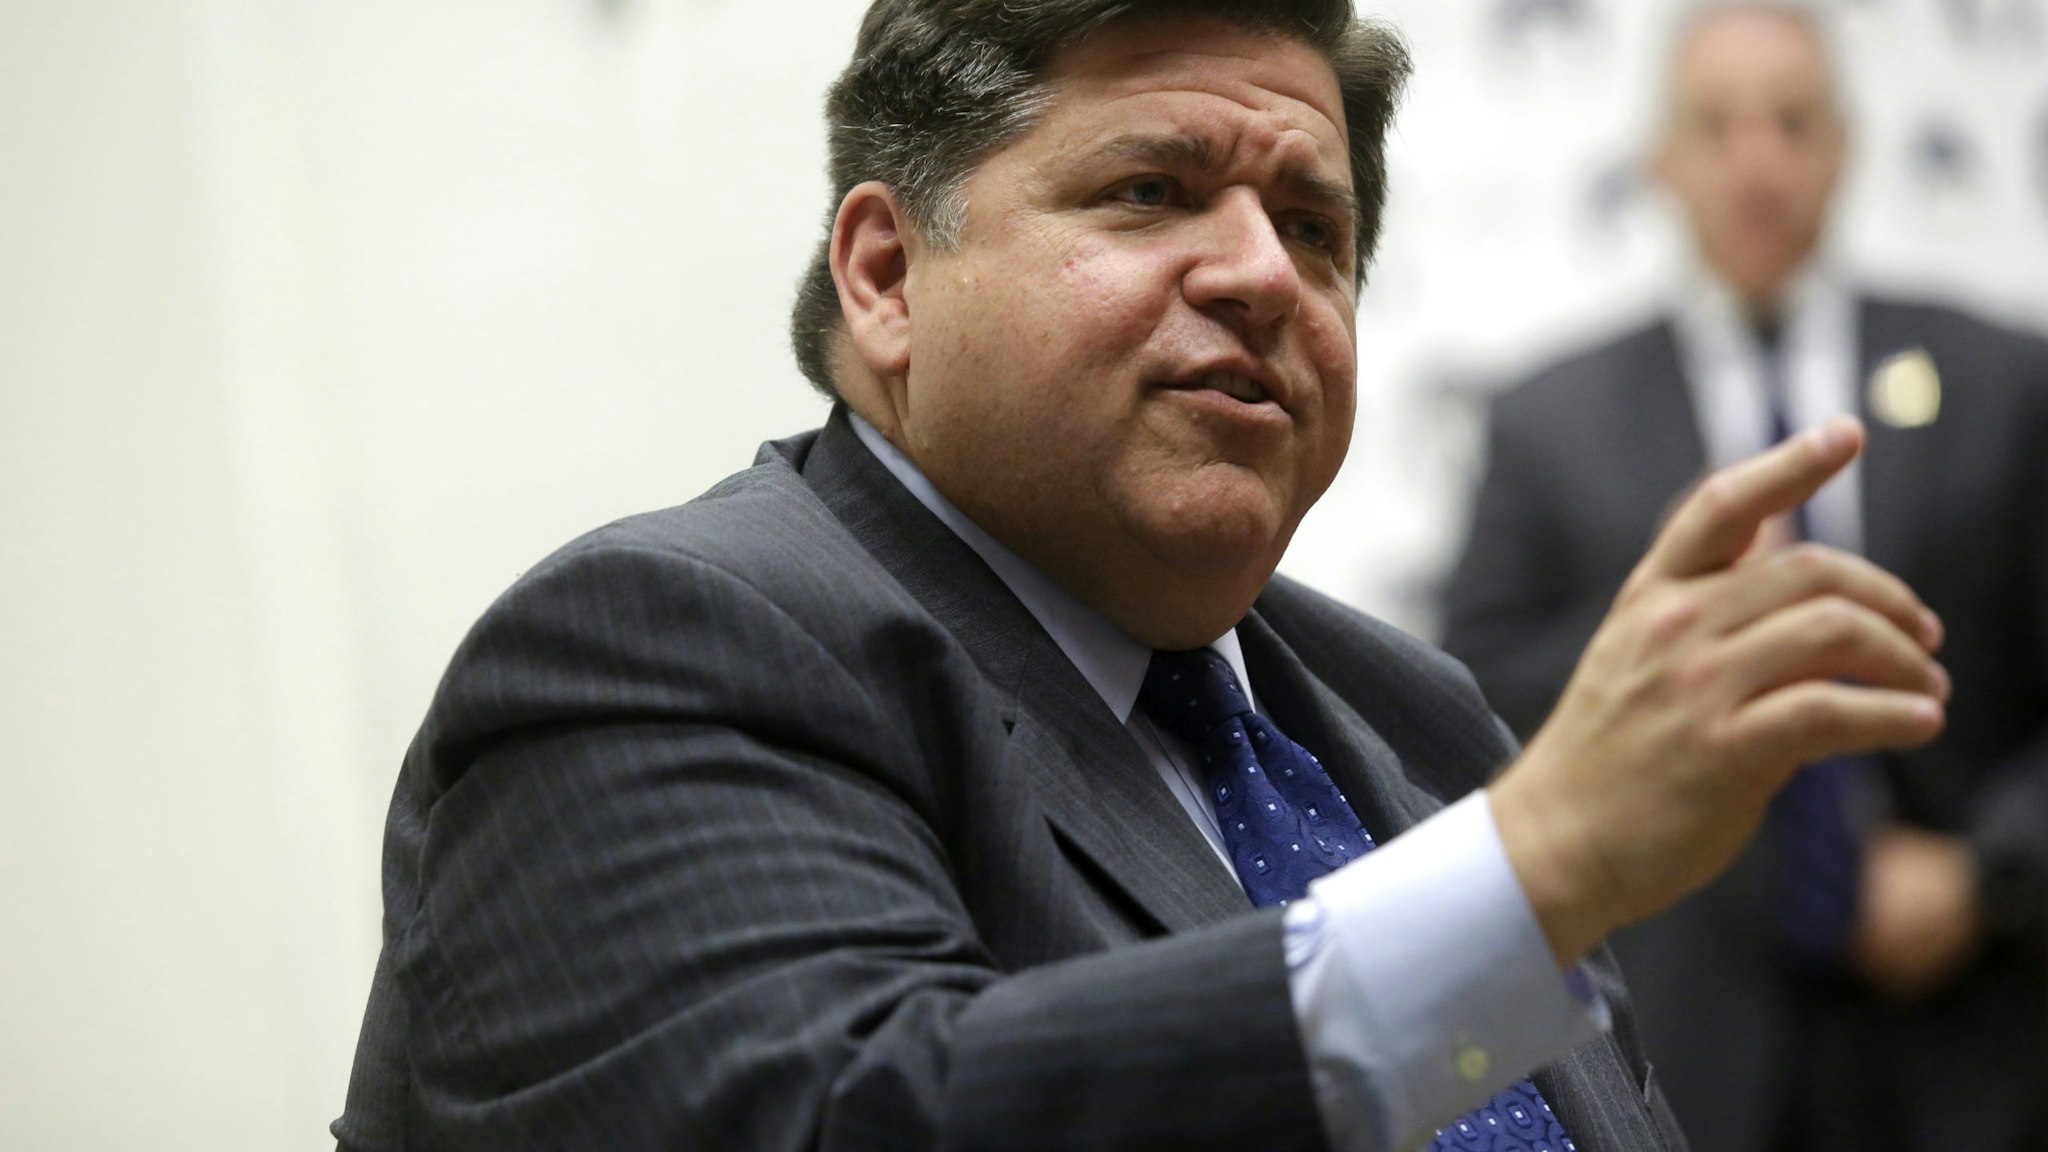 CHICAGO, IL - OCTOBER 01: Illinois gubernatorial candidate J.B. Pritzker speaks during a round table discussion with high school students at a creative workspace for women on October 1, 2018 in Chicago, Illinois. Pritzker was joined by his Illinois gubernatorial Lieutenant Governor candidate Juliana Stratton and former Secretary of State Hillary Clinton as they spoke to students about leadership. (Photo by Joshua Lott/Getty Images)